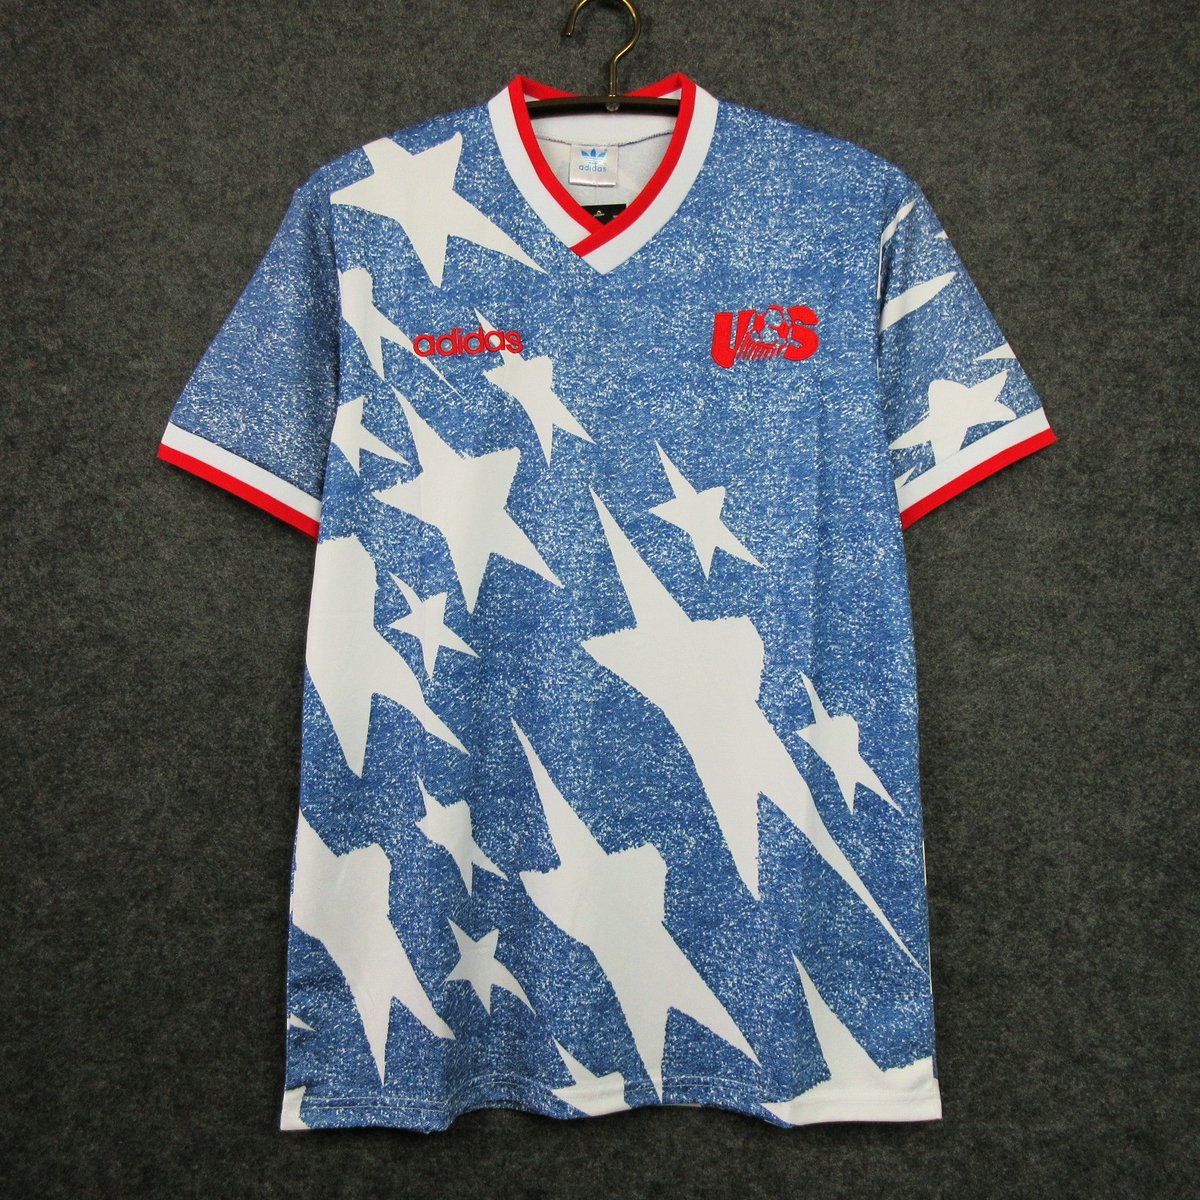 1994 Home  World cup jerseys, Usa world cup, World cup